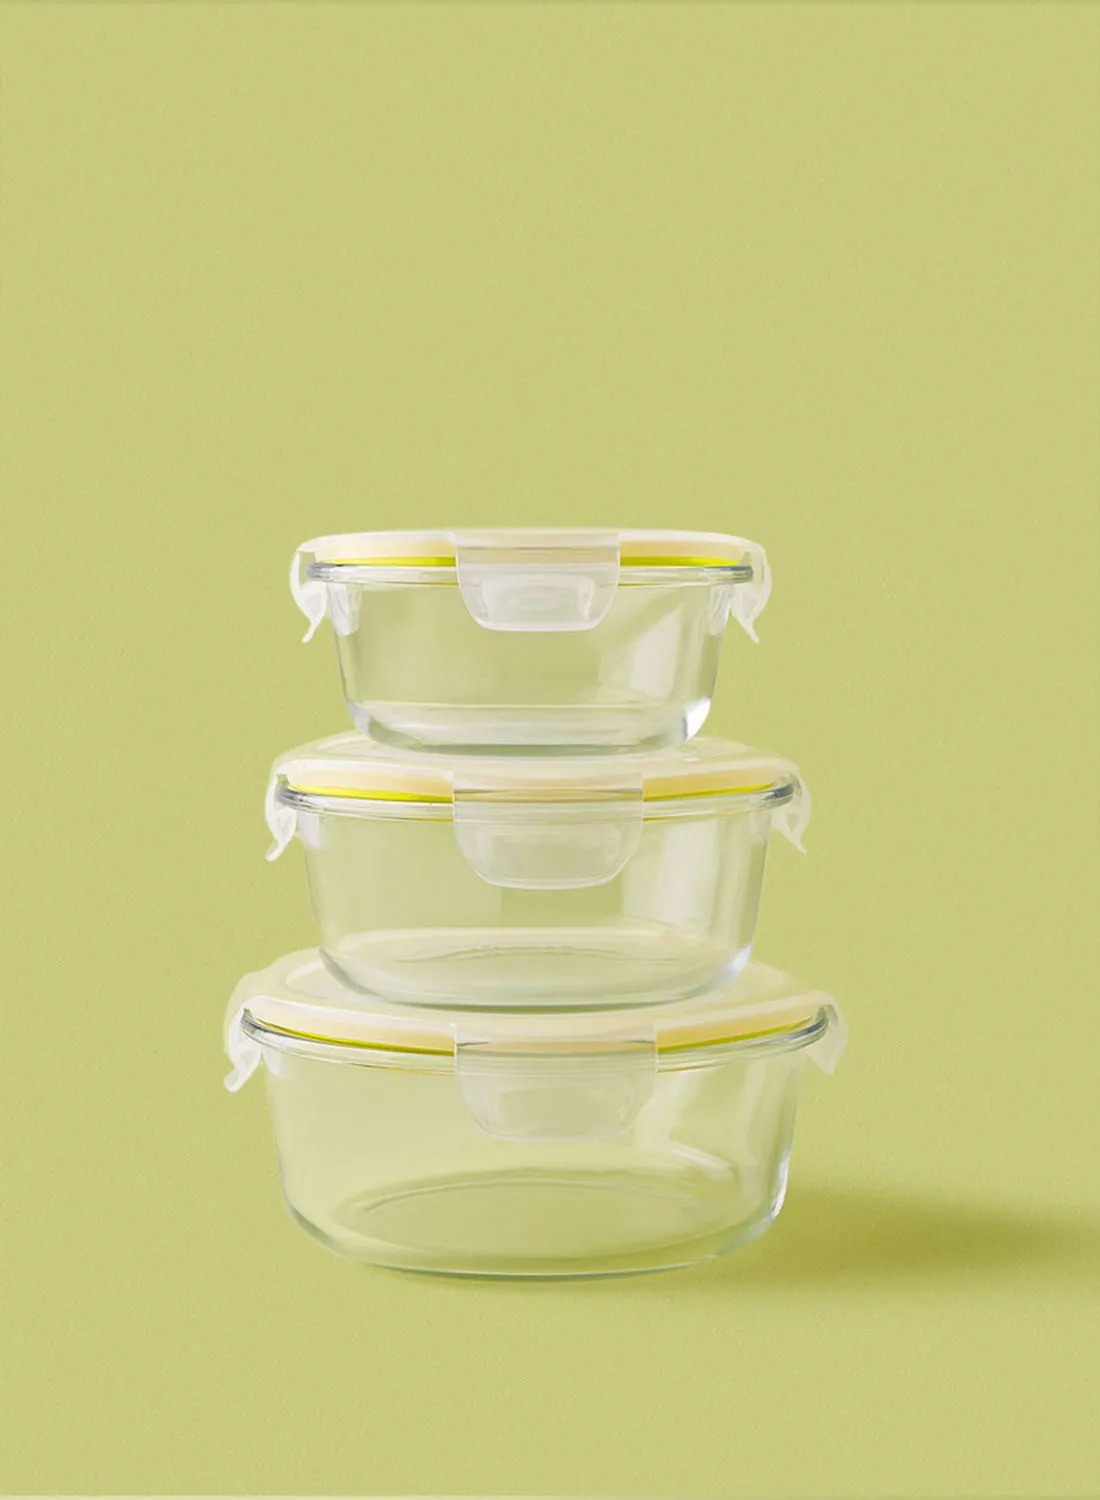 noon east 3 Piece Borosilicate Glass Food Container Set - Airtight Lids - Lunch Box - Round - Food Storage Box - Storage Boxes - Kitchen Cabinet Organizers - Glass Food Container - Yellow